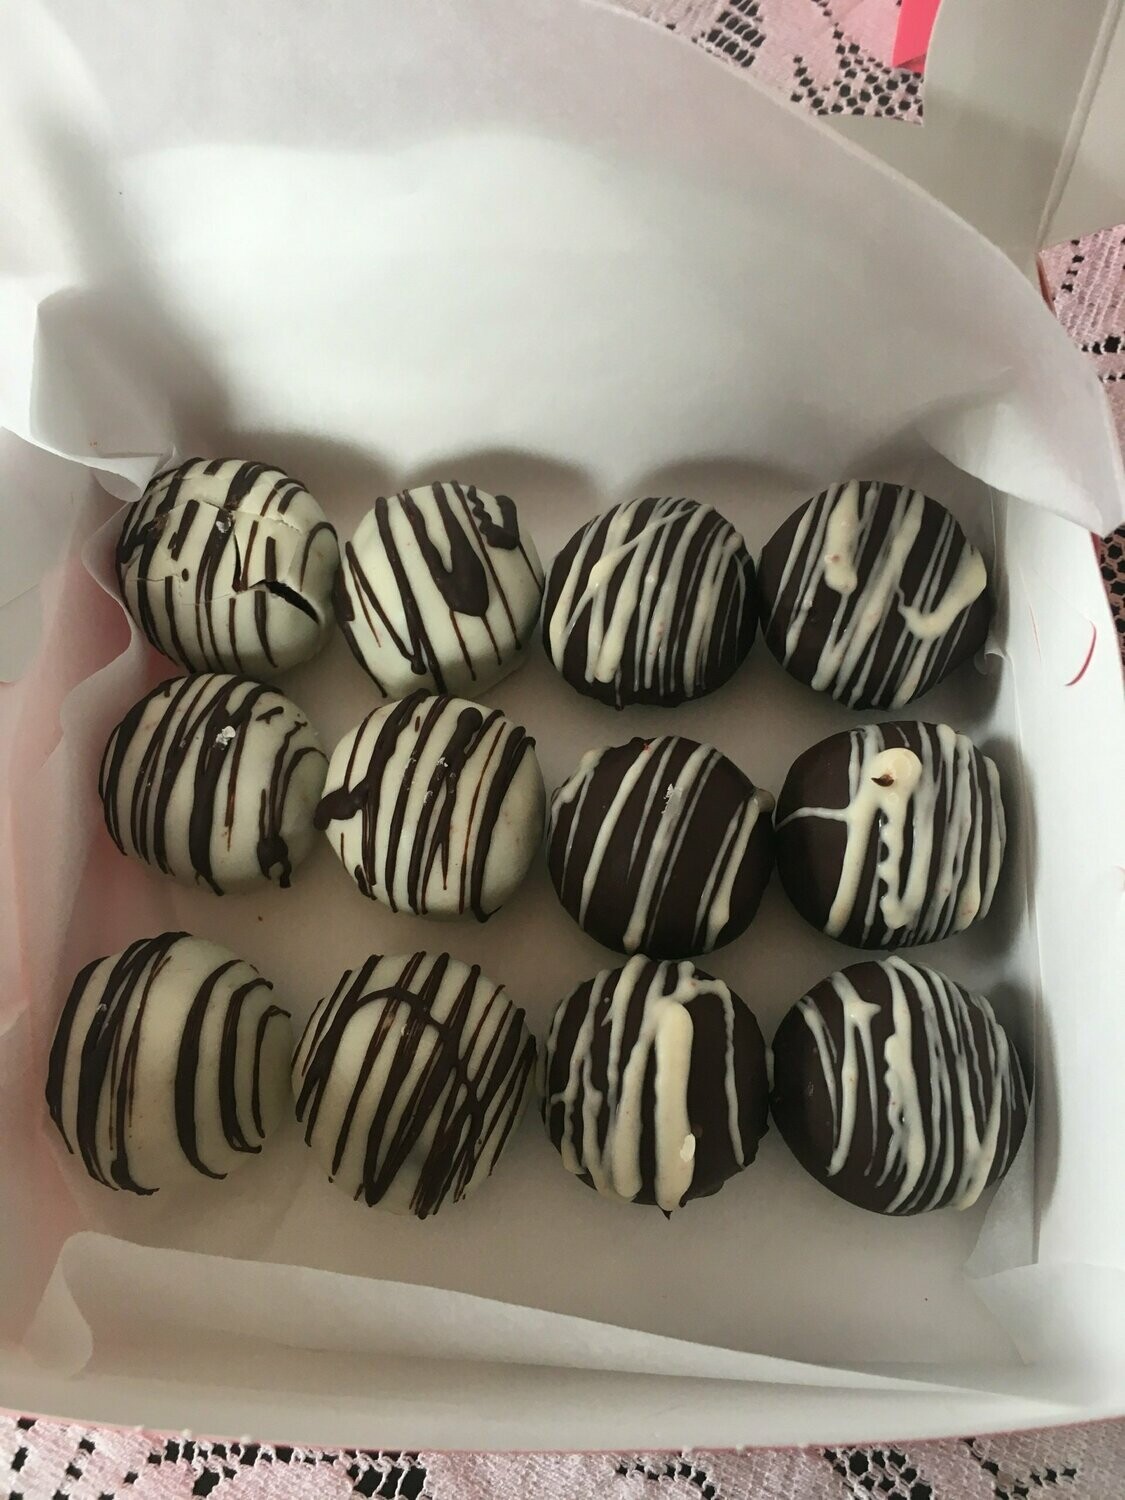 SPIKED BONBONS